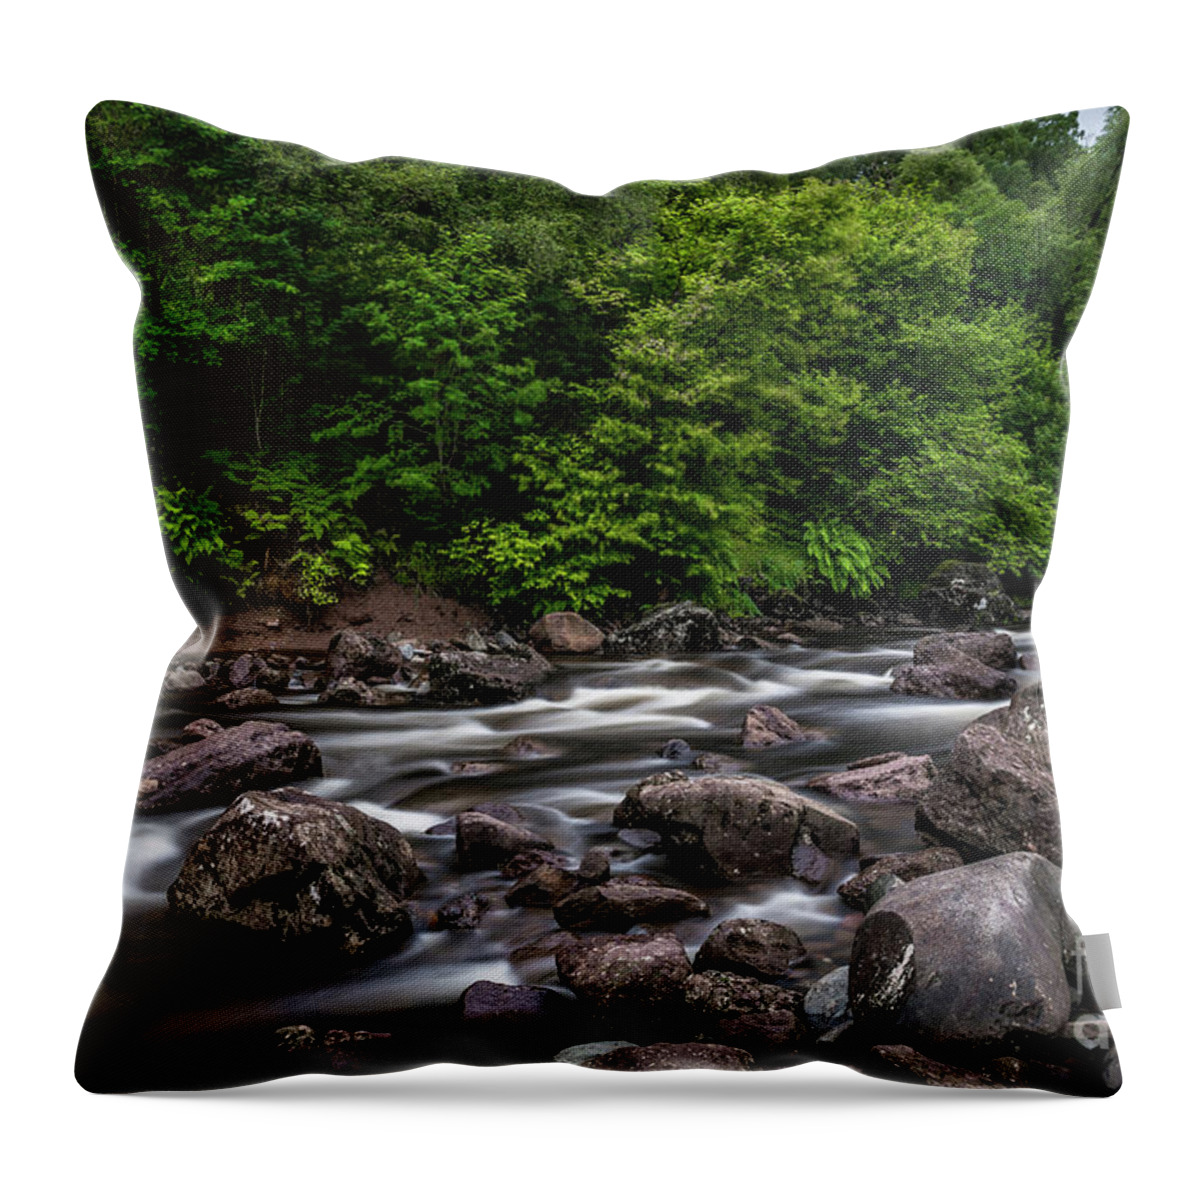 Background Throw Pillow featuring the photograph Wild Mountain River Streaming Through Green Forest in Scotland by Andreas Berthold